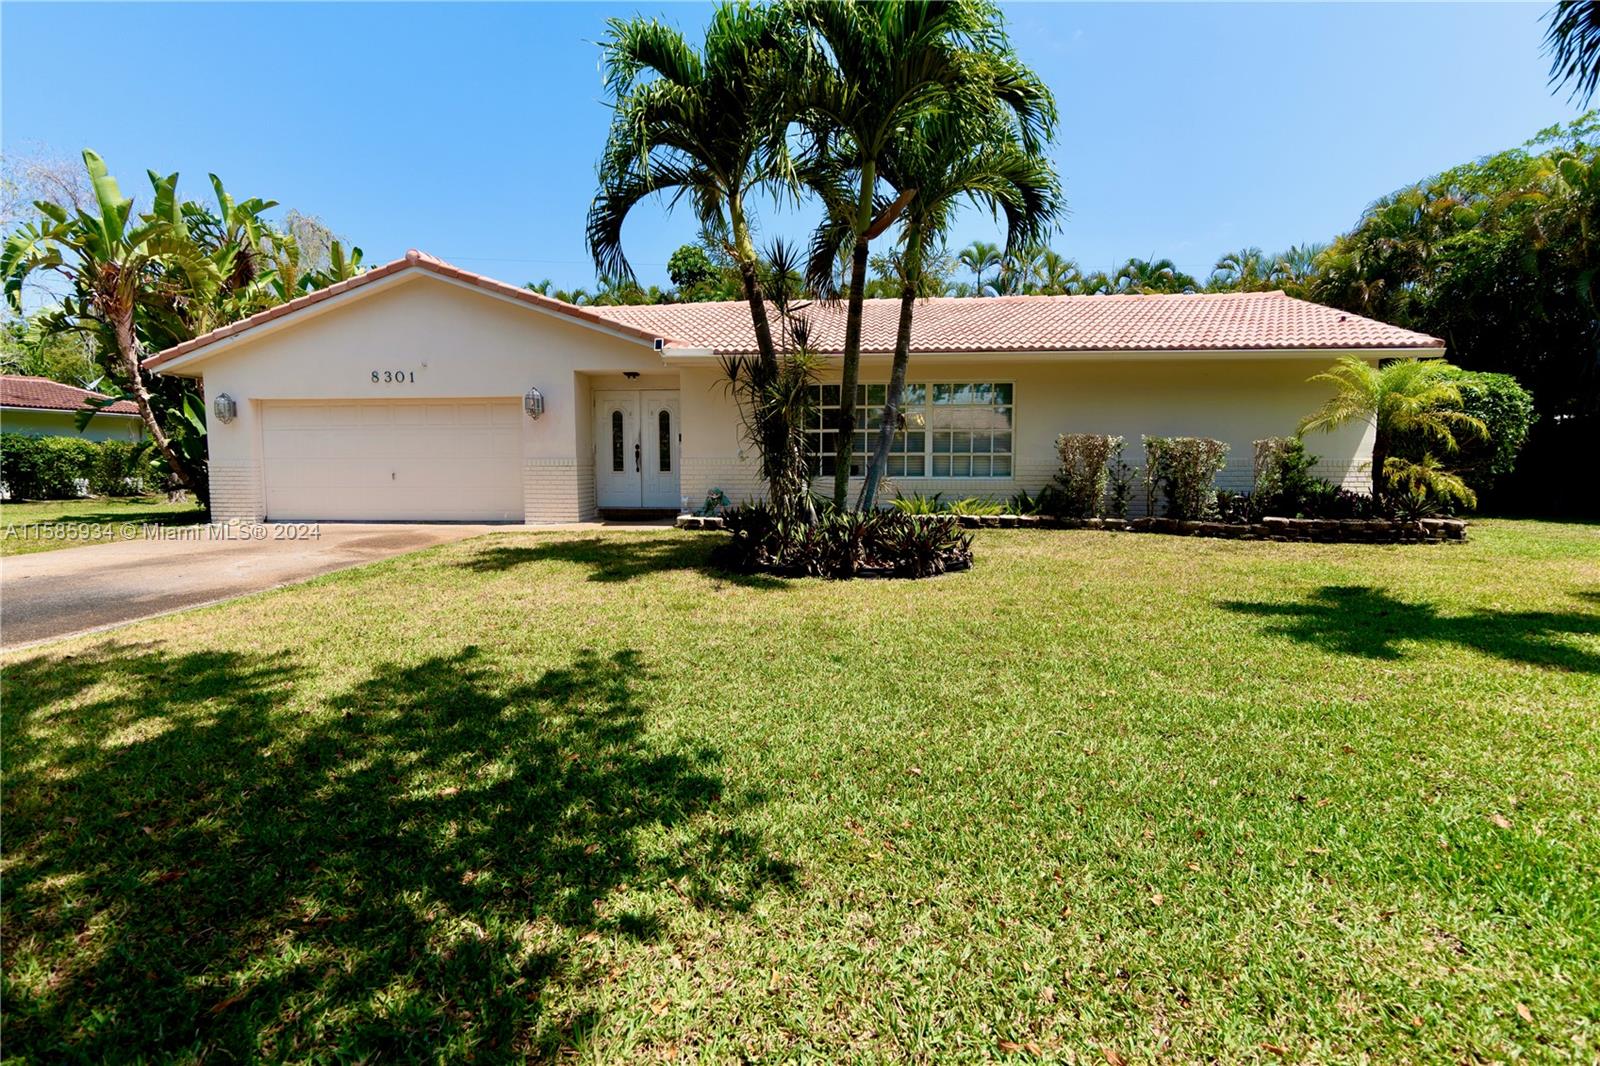 Property for Sale at 8301 Nw 36th Ct Ct, Coral Springs, Broward County, Florida - Bedrooms: 3 
Bathrooms: 2  - $679,999